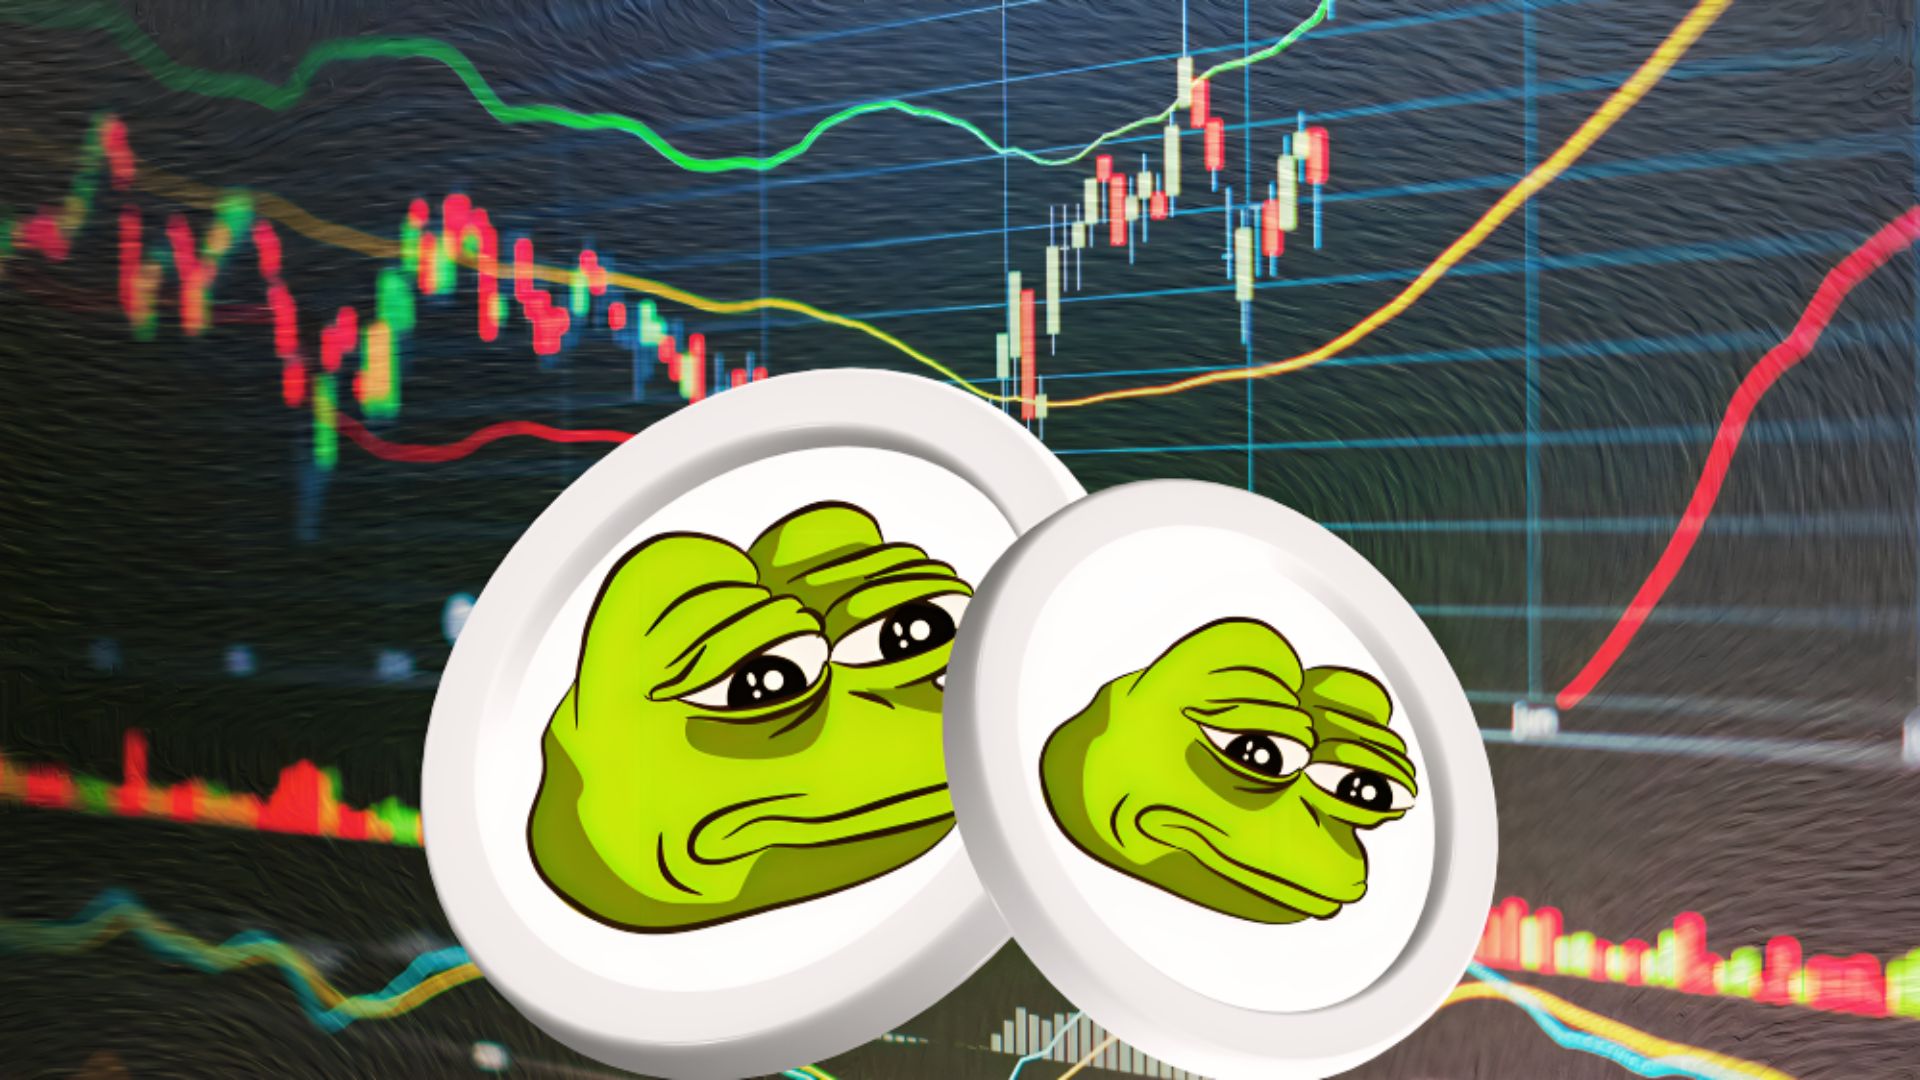 PEPE Coin Price Prediction: Will the Price Continue its Fall?